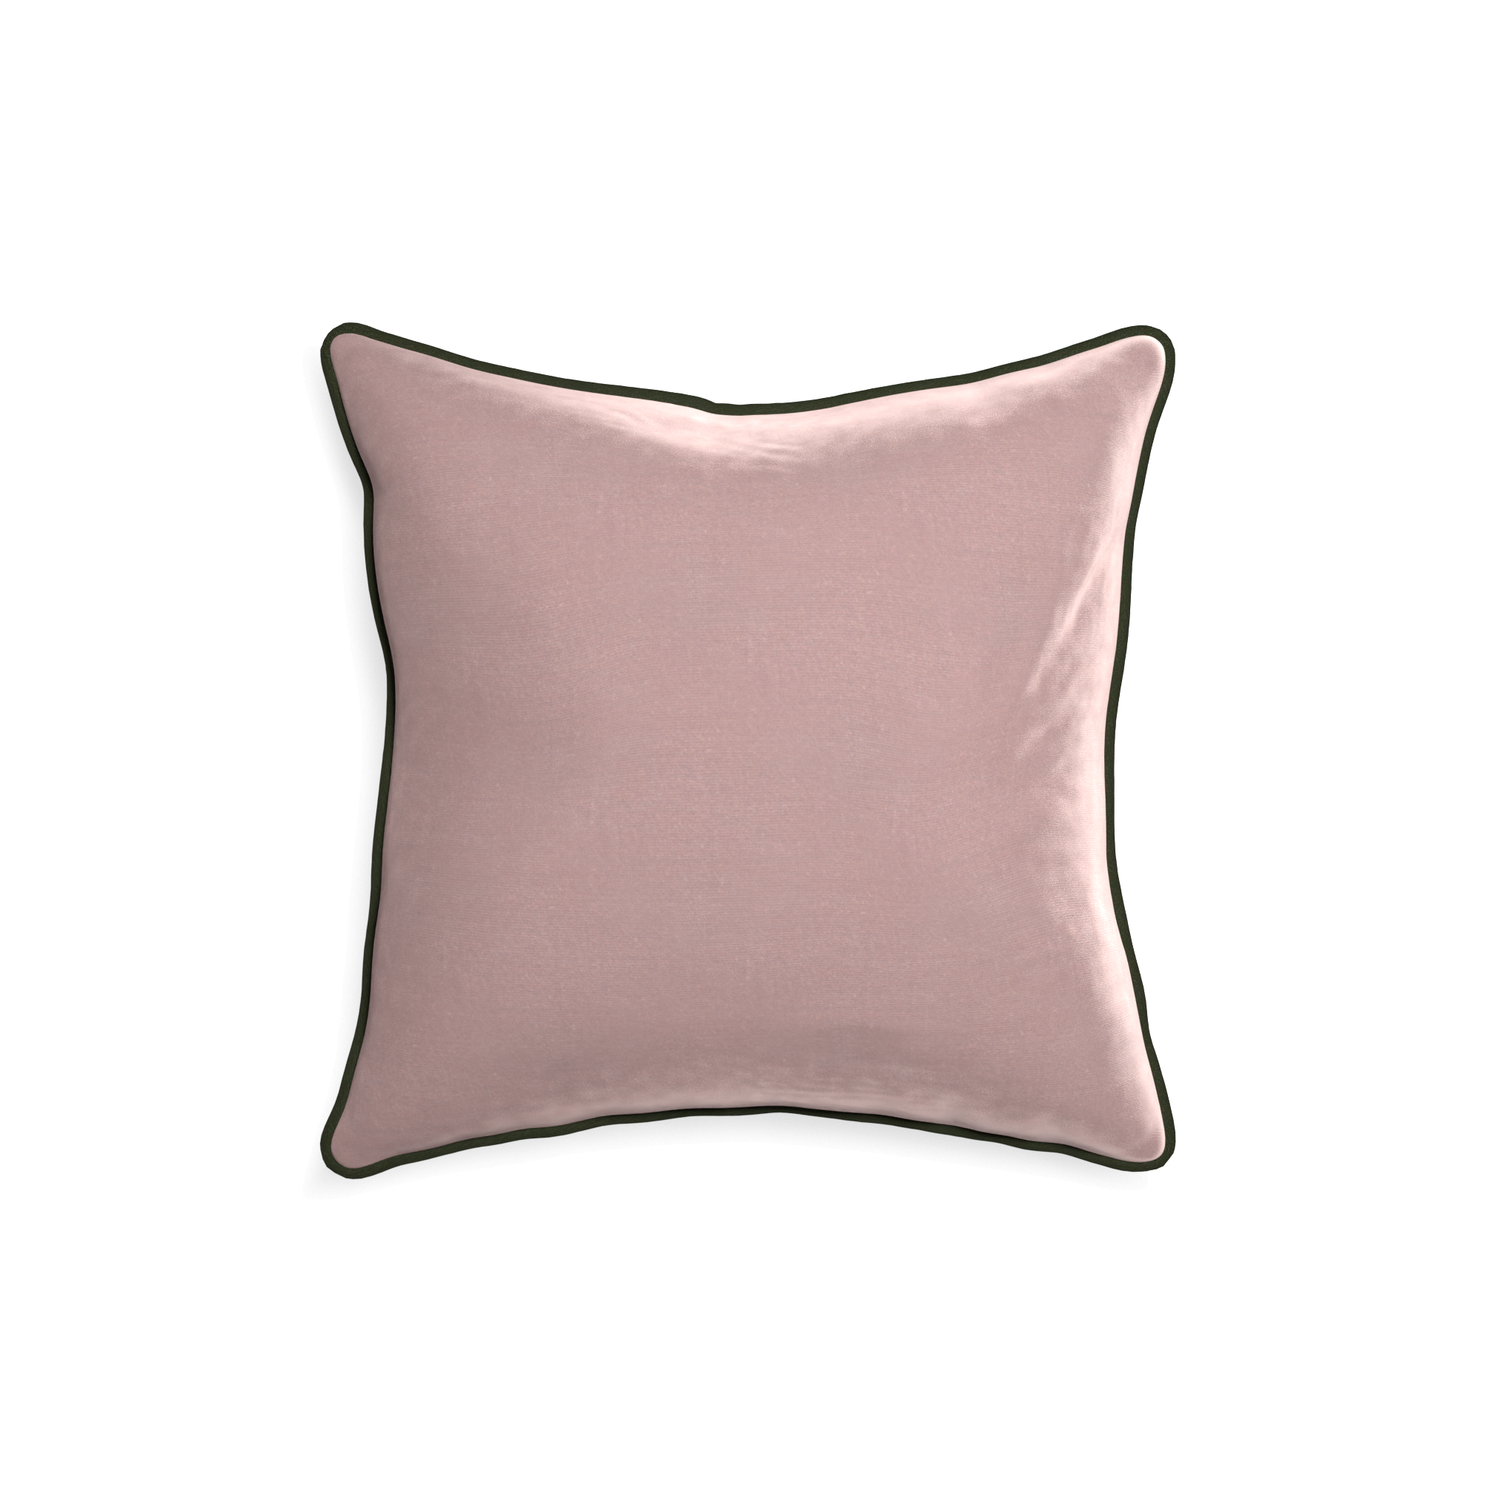 18-square mauve velvet custom pillow with f piping on white background